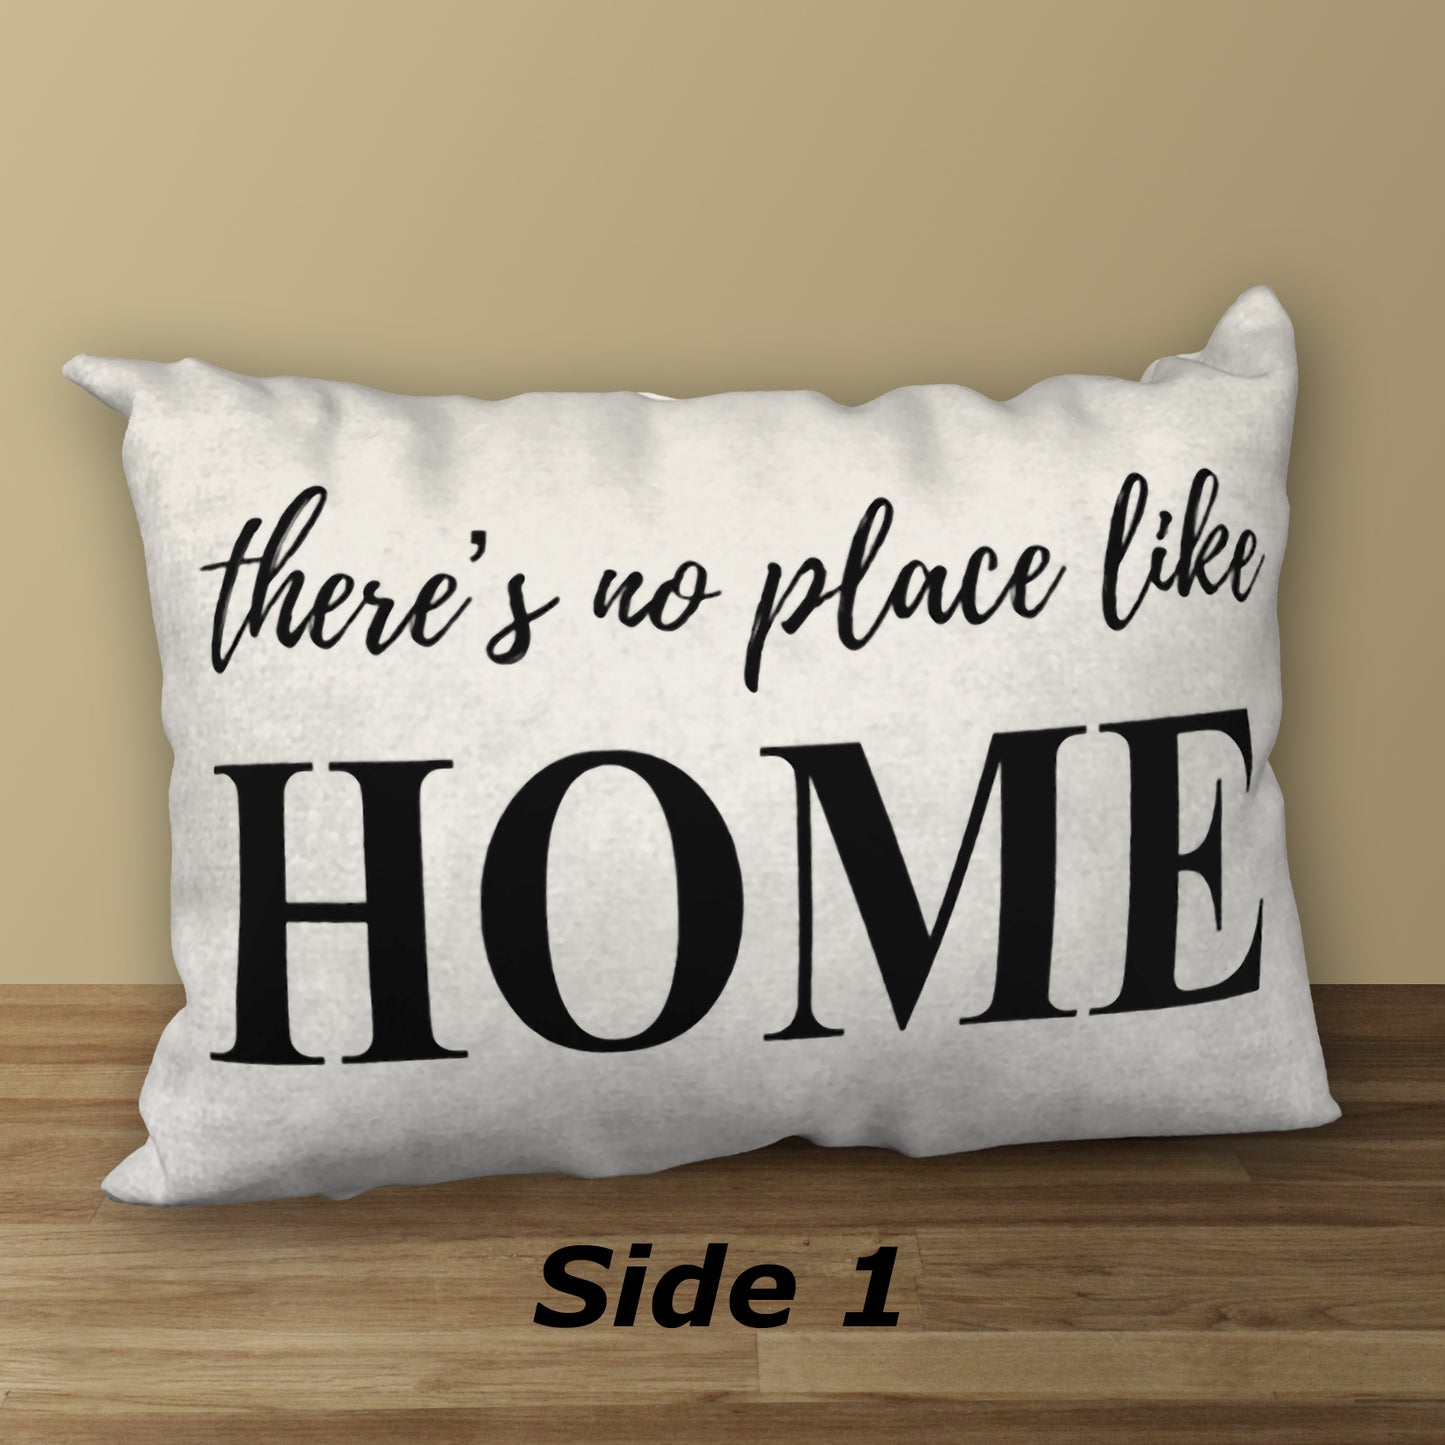 There's No Place Like Home Designer Pillow, 20"x14"